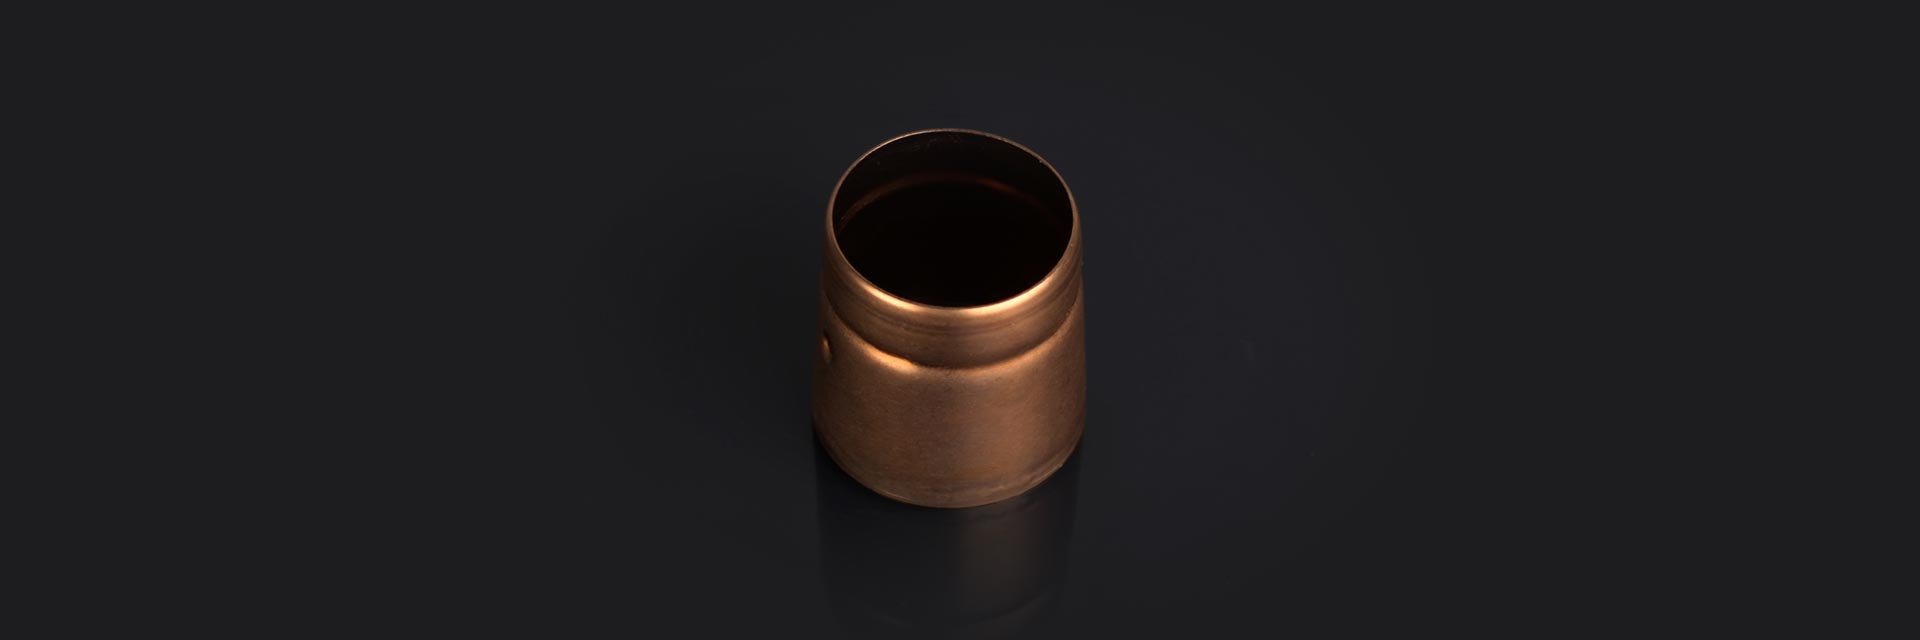 Copper plated